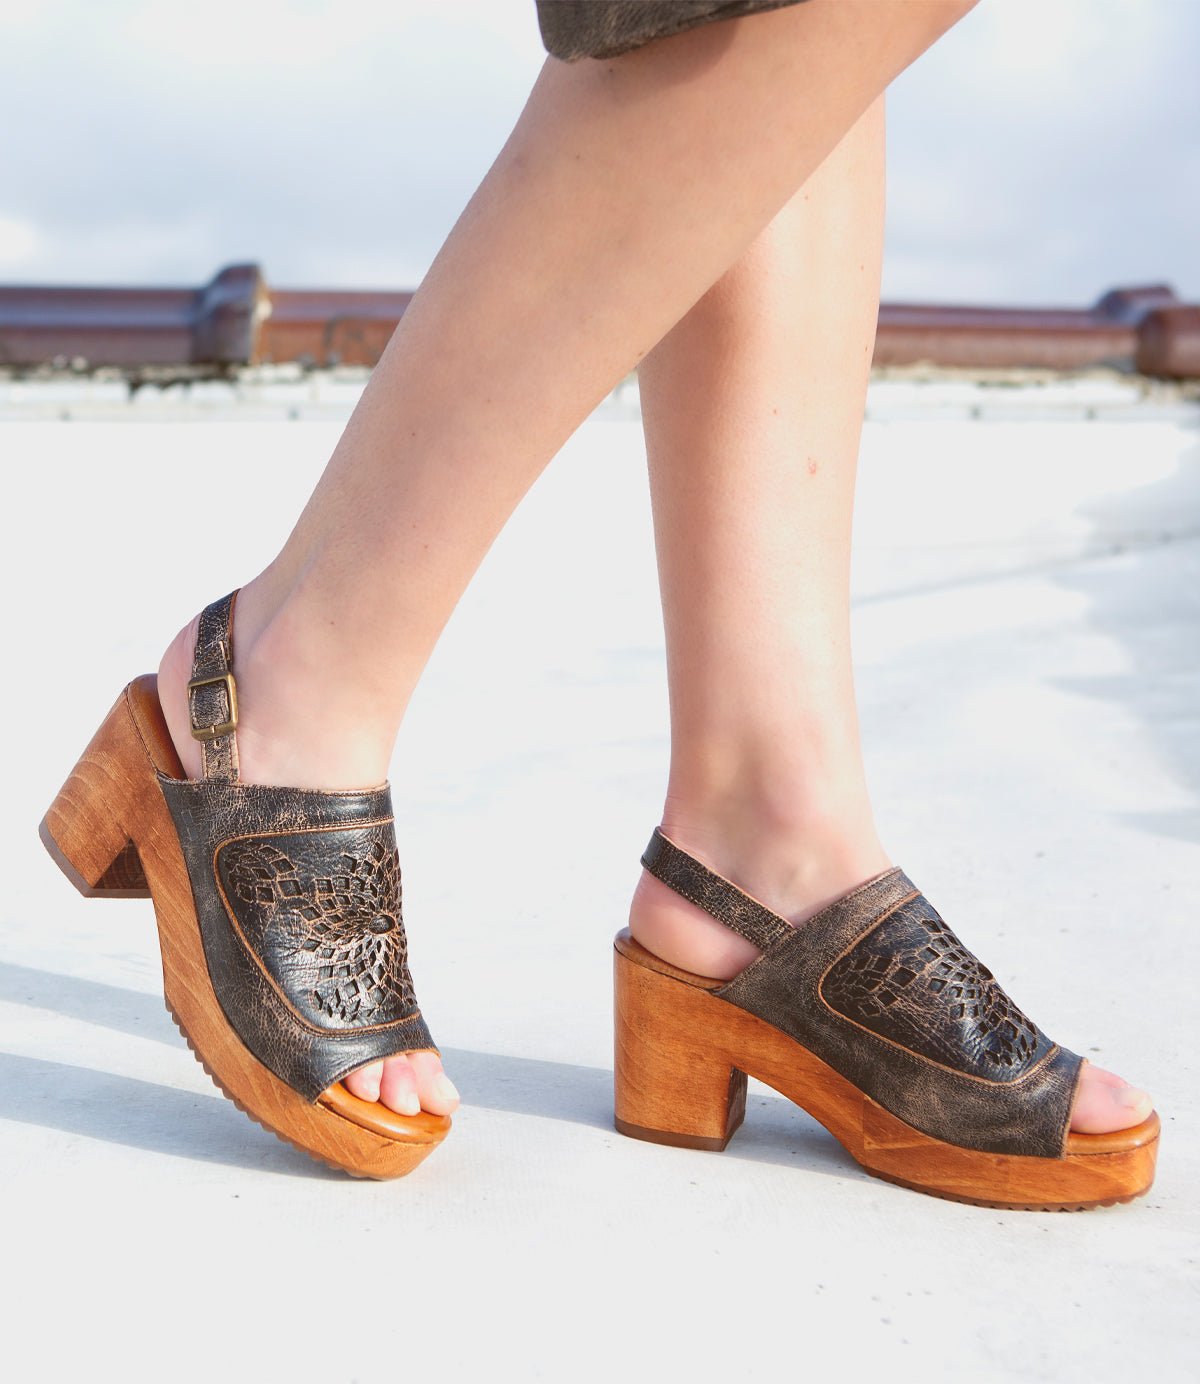 A woman wearing a pair of Bed Stu Jinkie wooden sandals on a roof. Decorating her feet with open-toe leather sandals, she confidently walks across the rooftop, the heeled wooden platform providing a stylish lift.